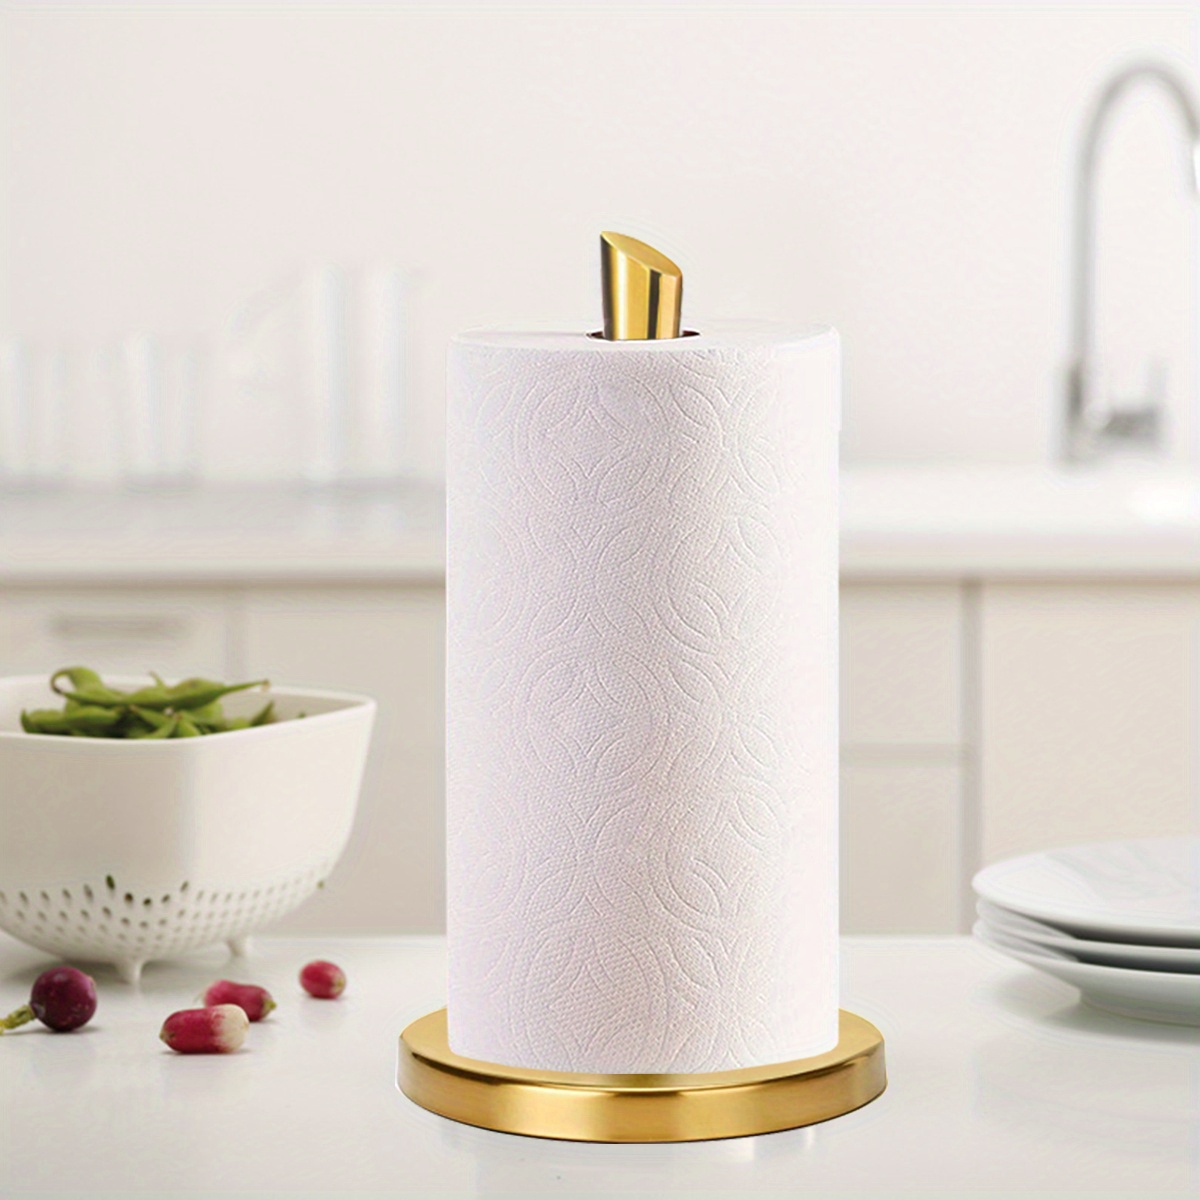 Free-standing Paper Towel Holder